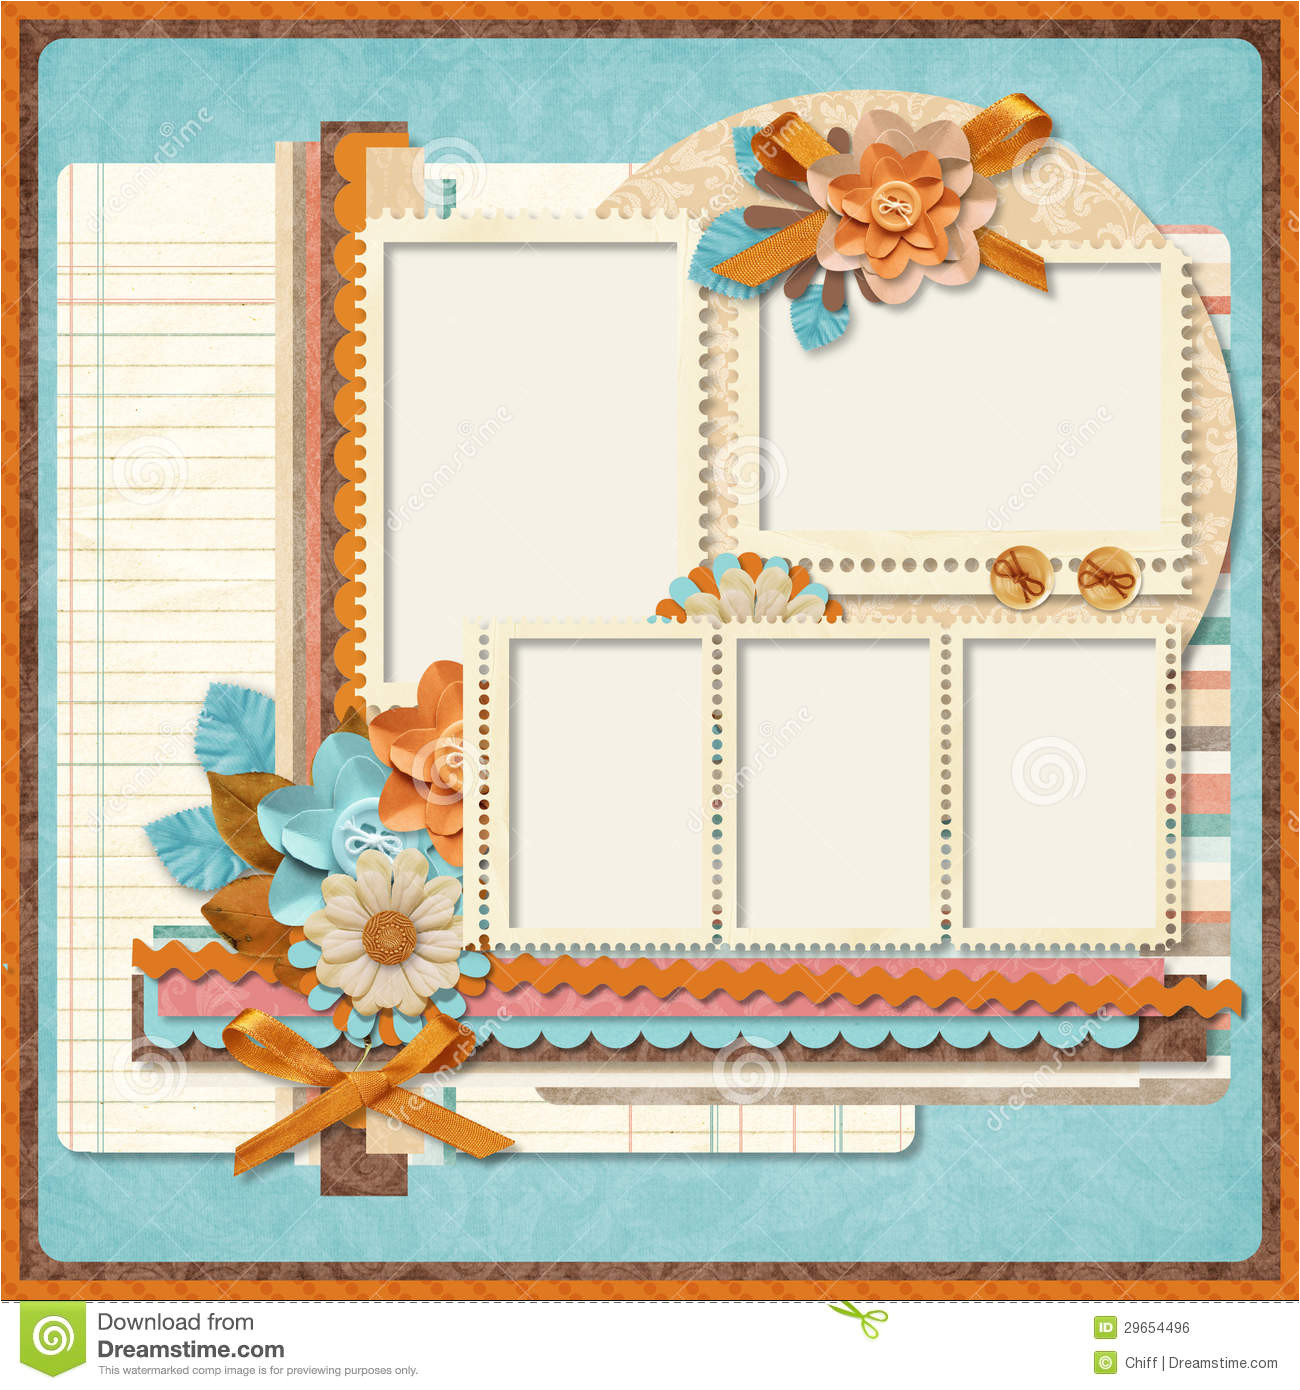 royalty free stock image retro family album 365 project scrapbooking templates image29654496